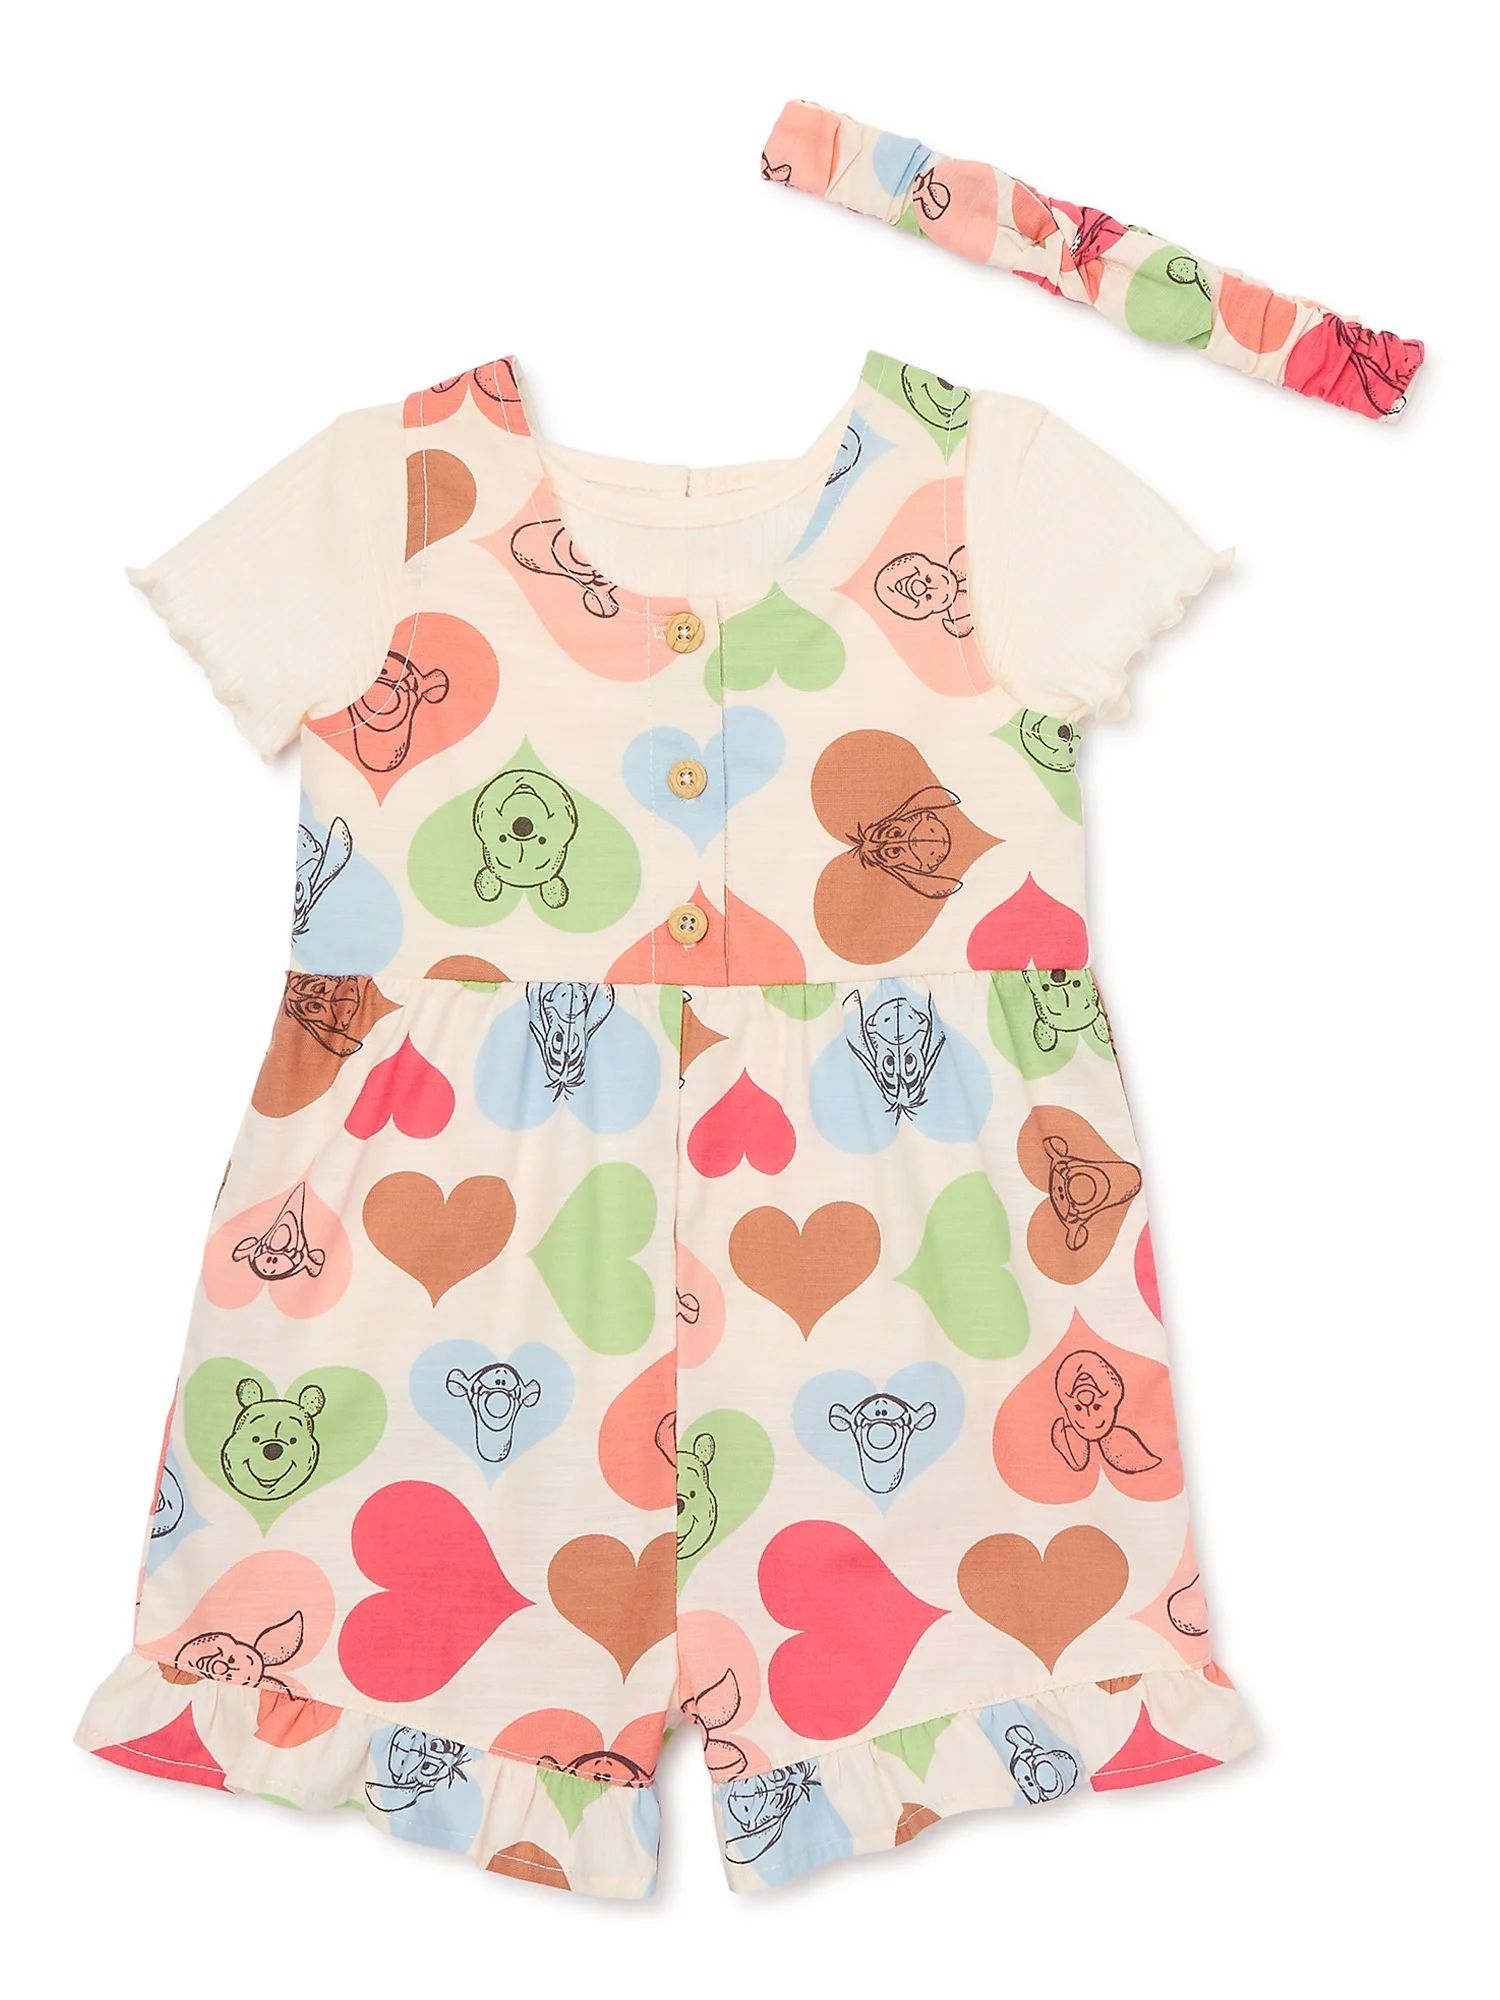 Winnie the Pooh Baby Girl Shortall and Tee Outfit Set with Headband, Sizes 0/3M-24M | Walmart (US)